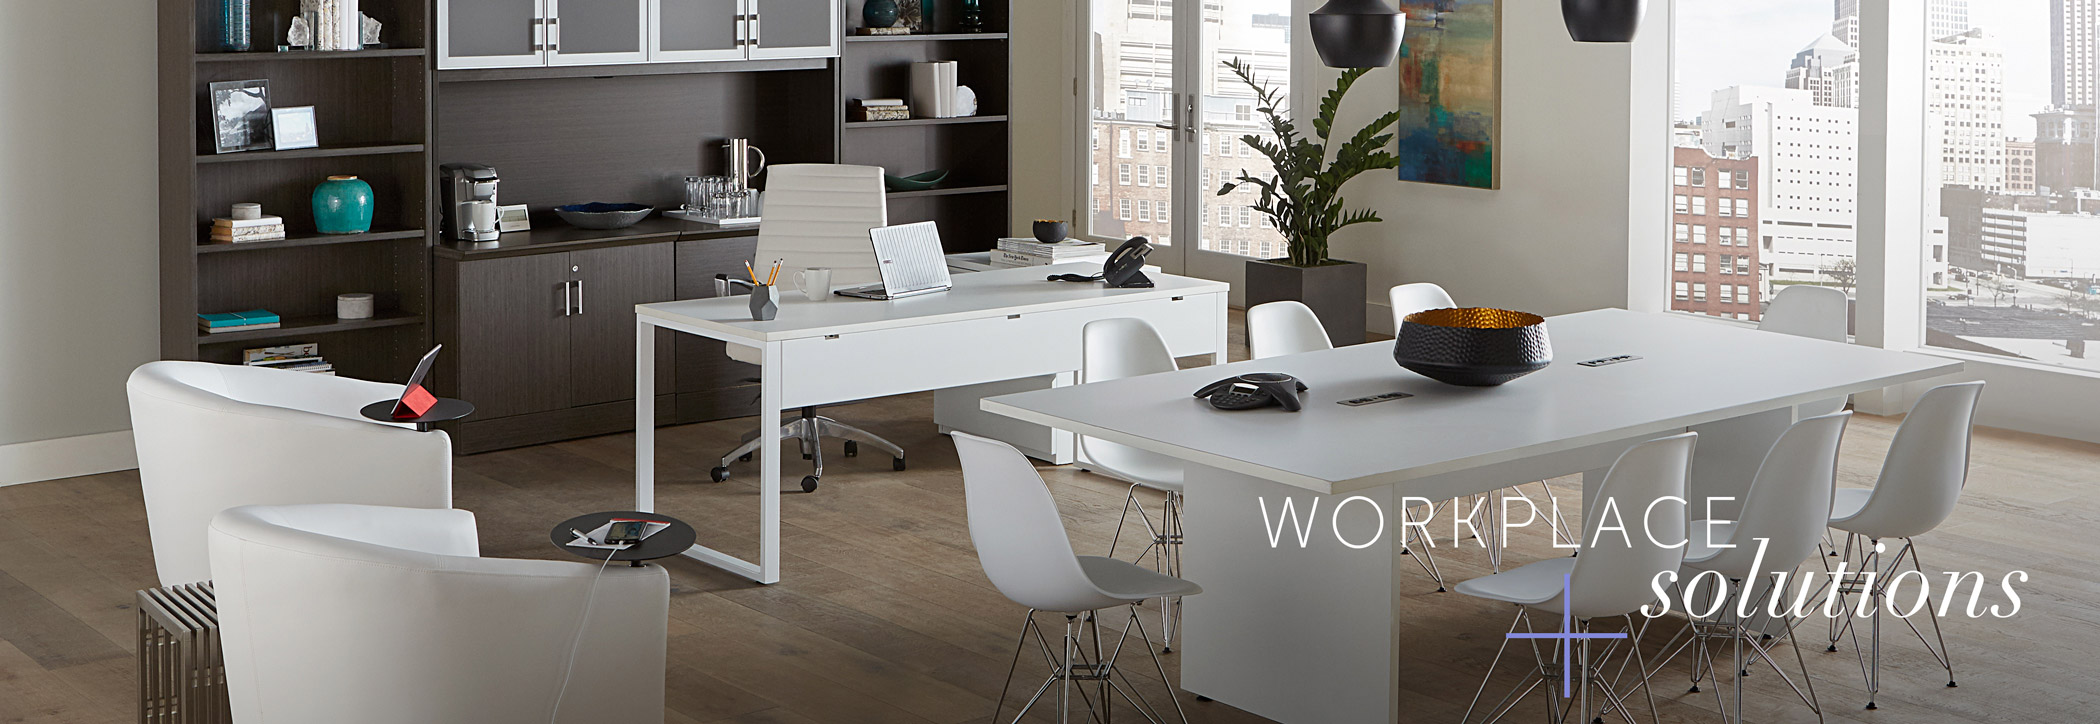 Rented furniture from AFR in office space with words ‘workplace solutions’